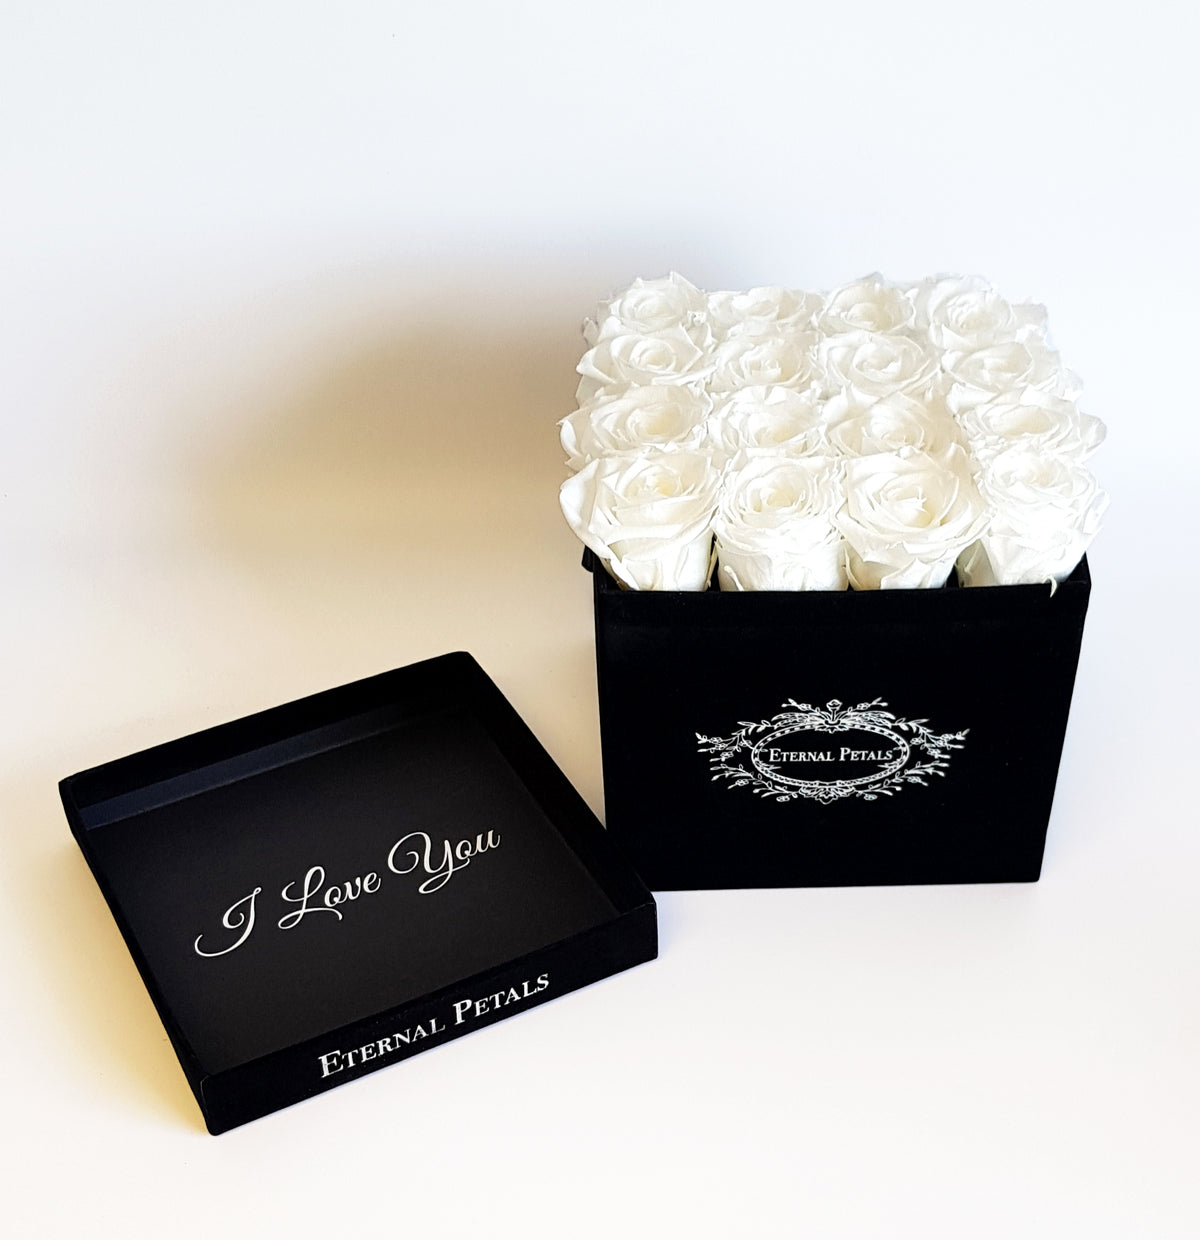 4 Ways to Personalise Your Eternal Petals Infinity Roses Box